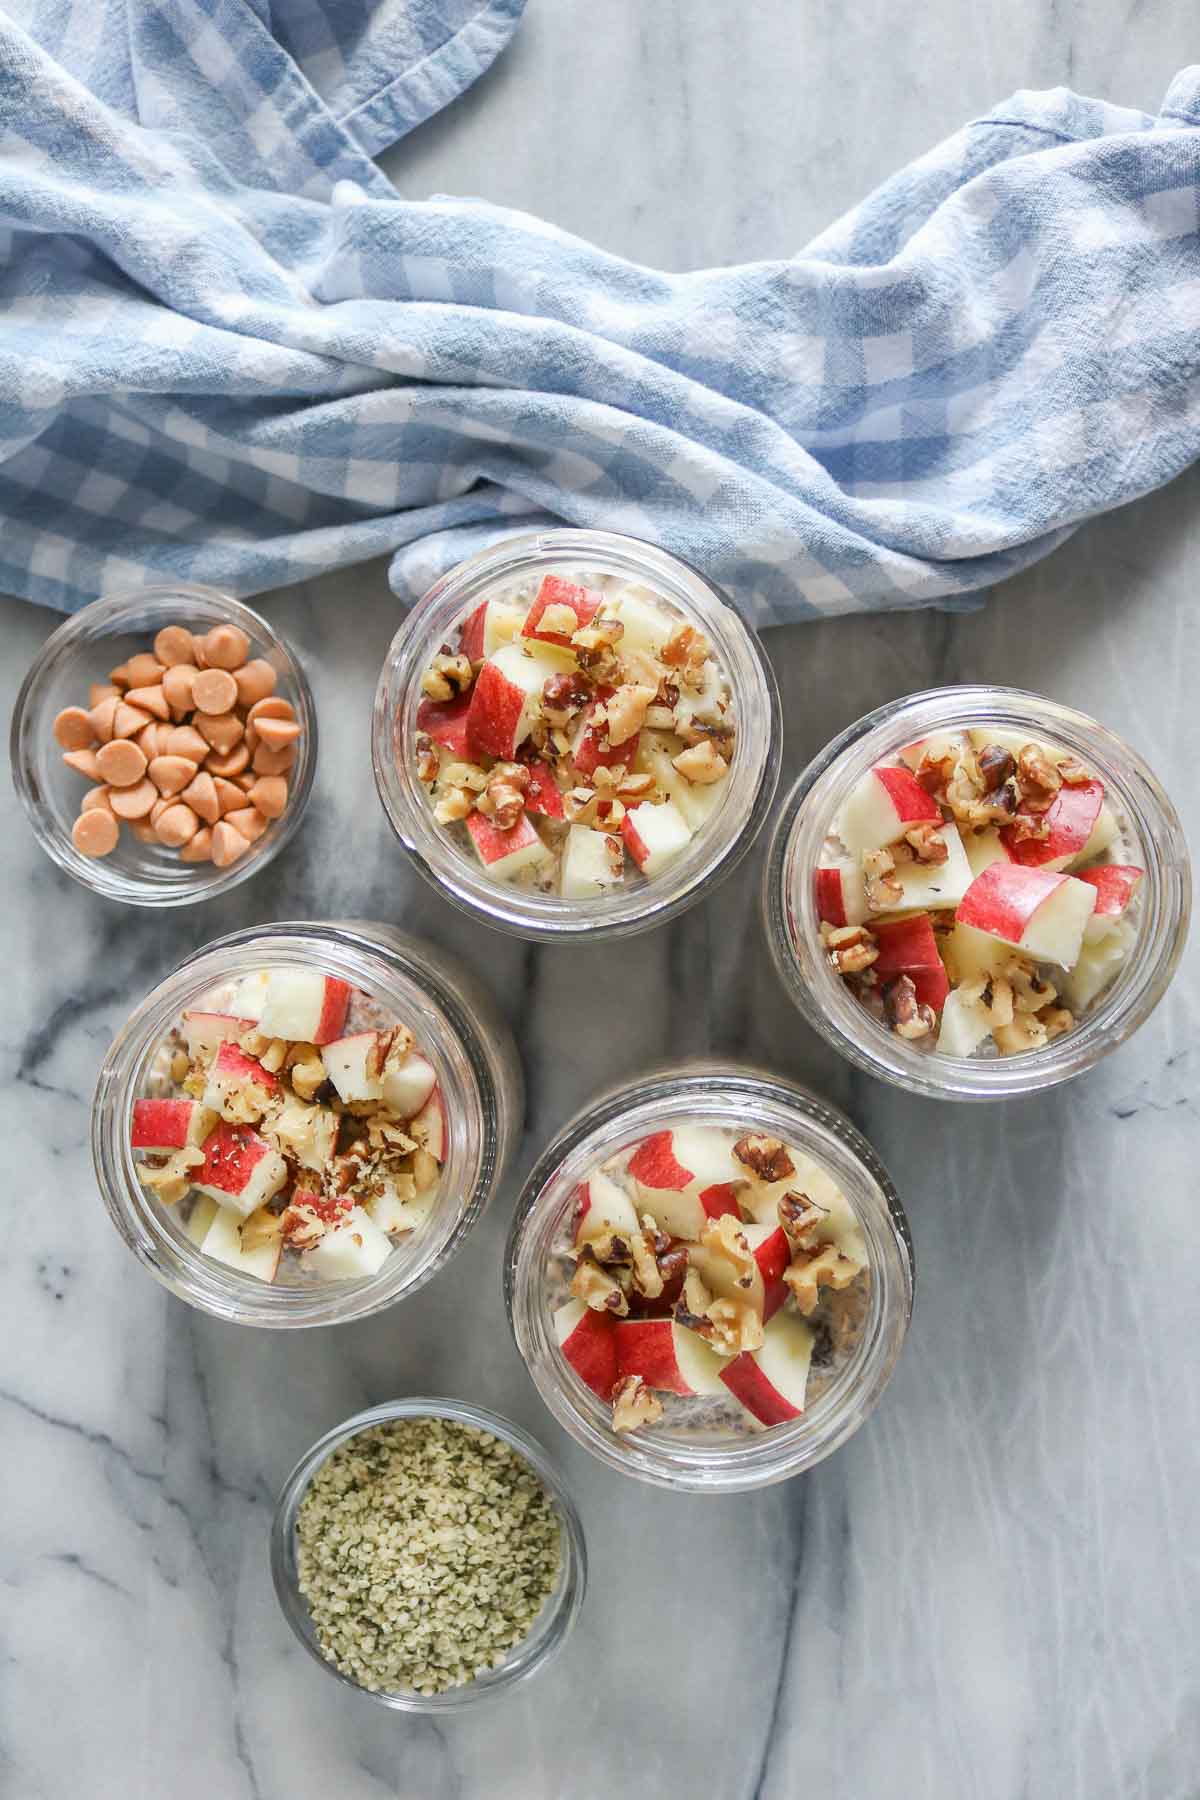 Four jars of overnight oats with toppings.